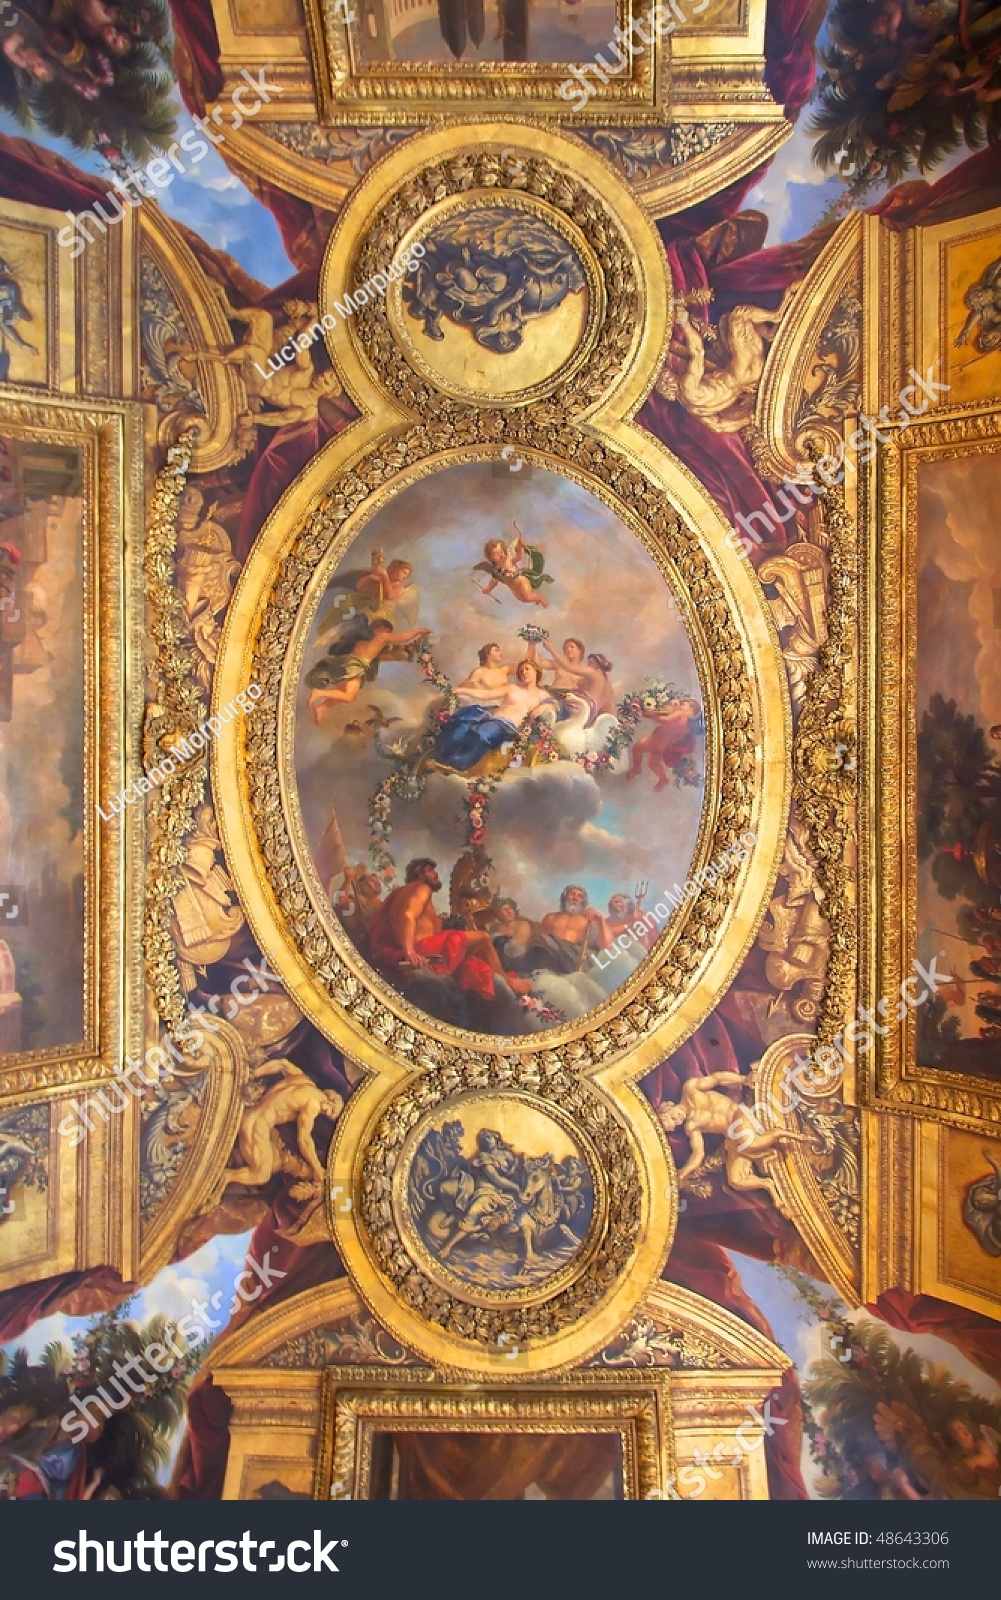 Castle Of Versailles, France - Ceiling Stock Photo 48643306 : Shutterstock